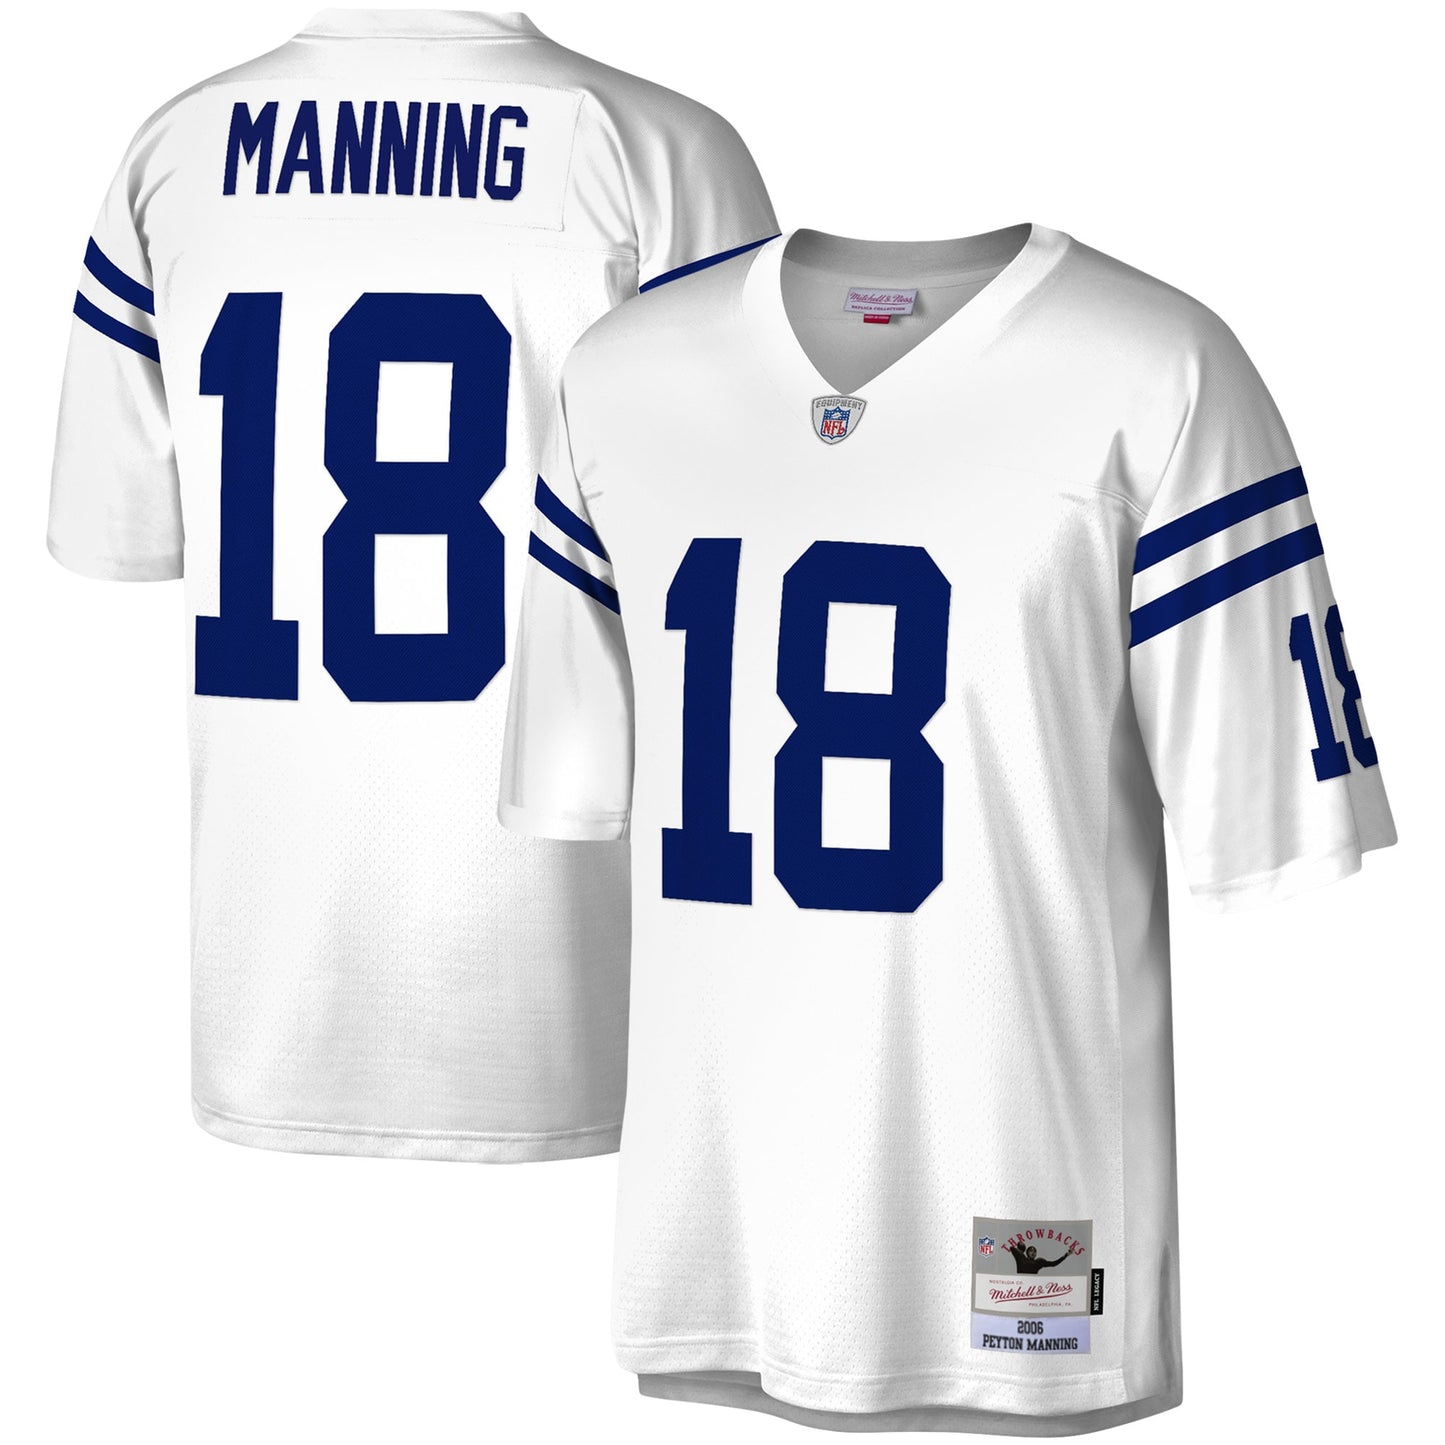 Peyton Manning Indianapolis Colts Mitchell & Ness Legacy Replica Jersey - White